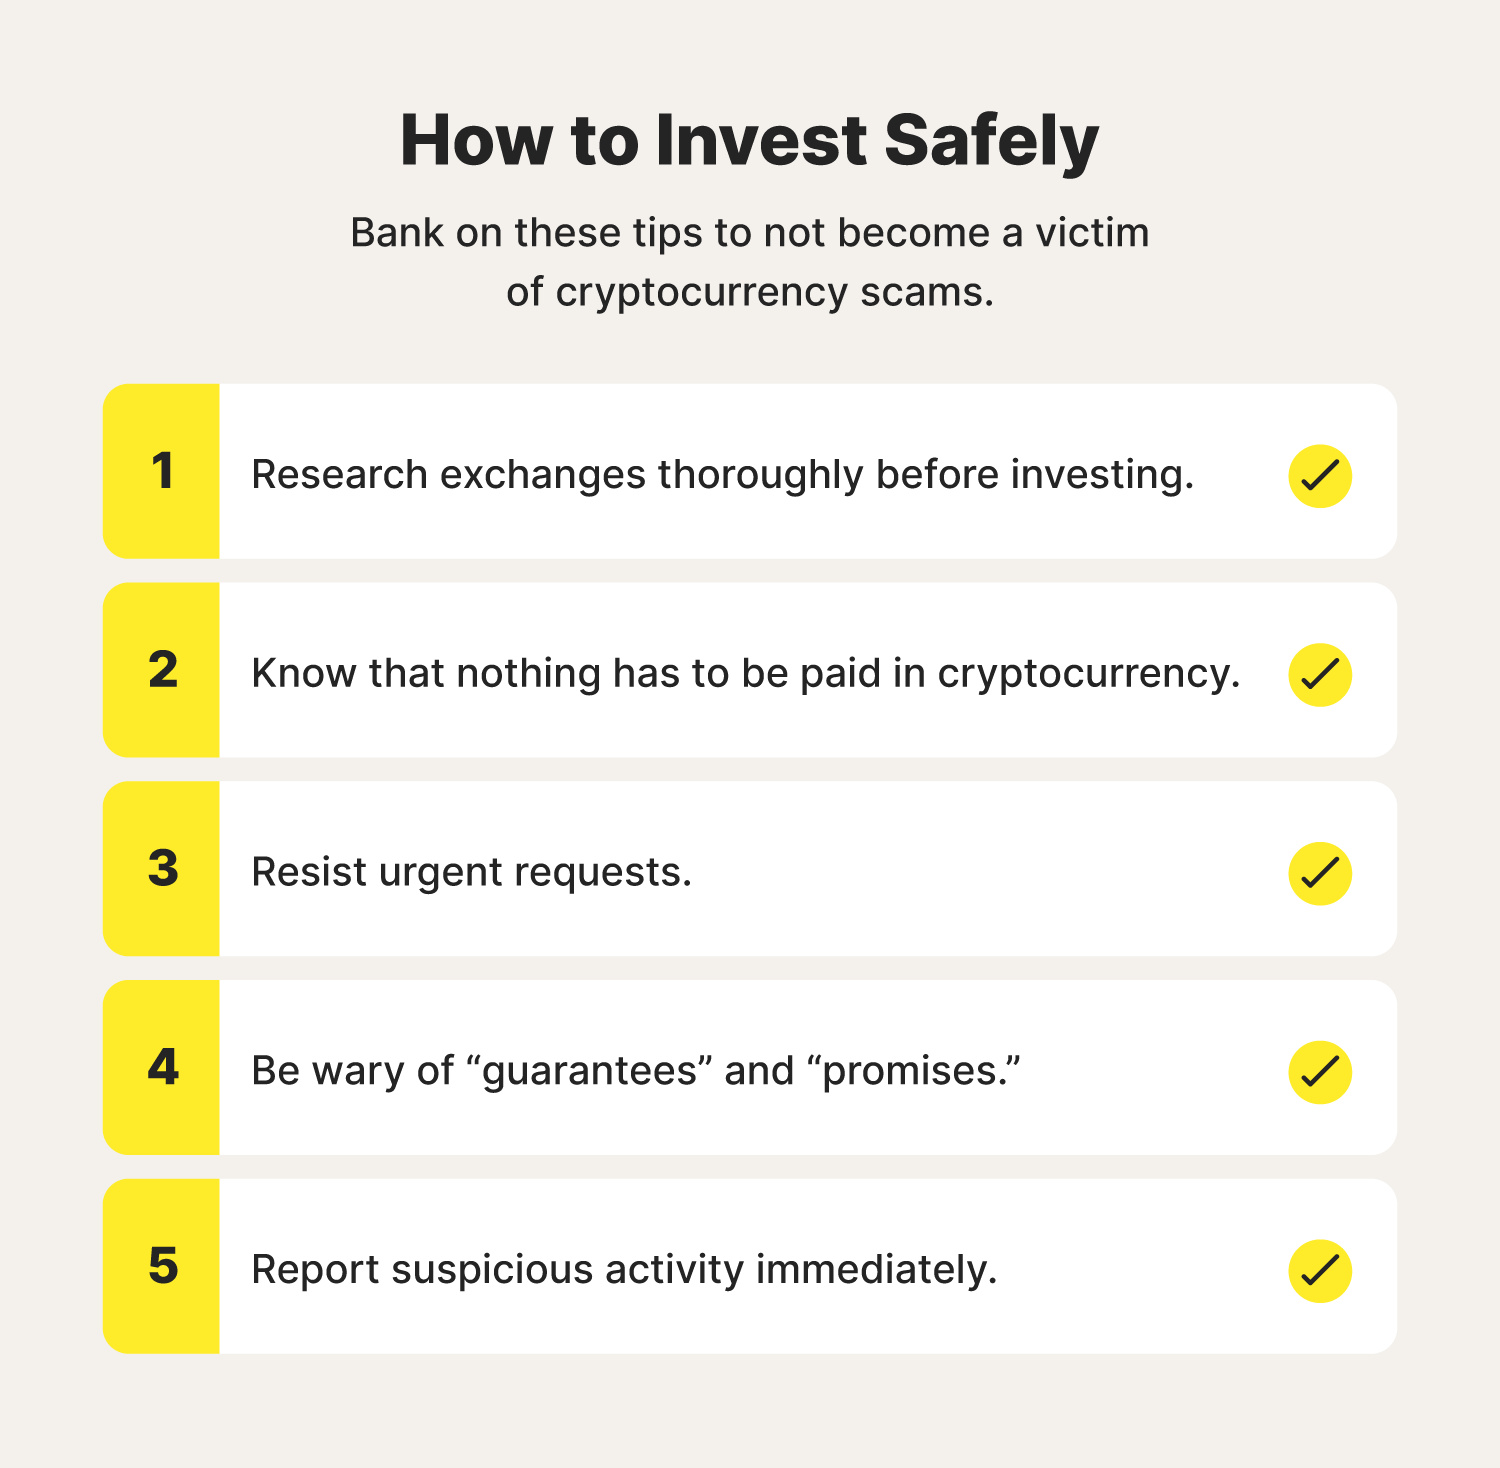 How to invest safely